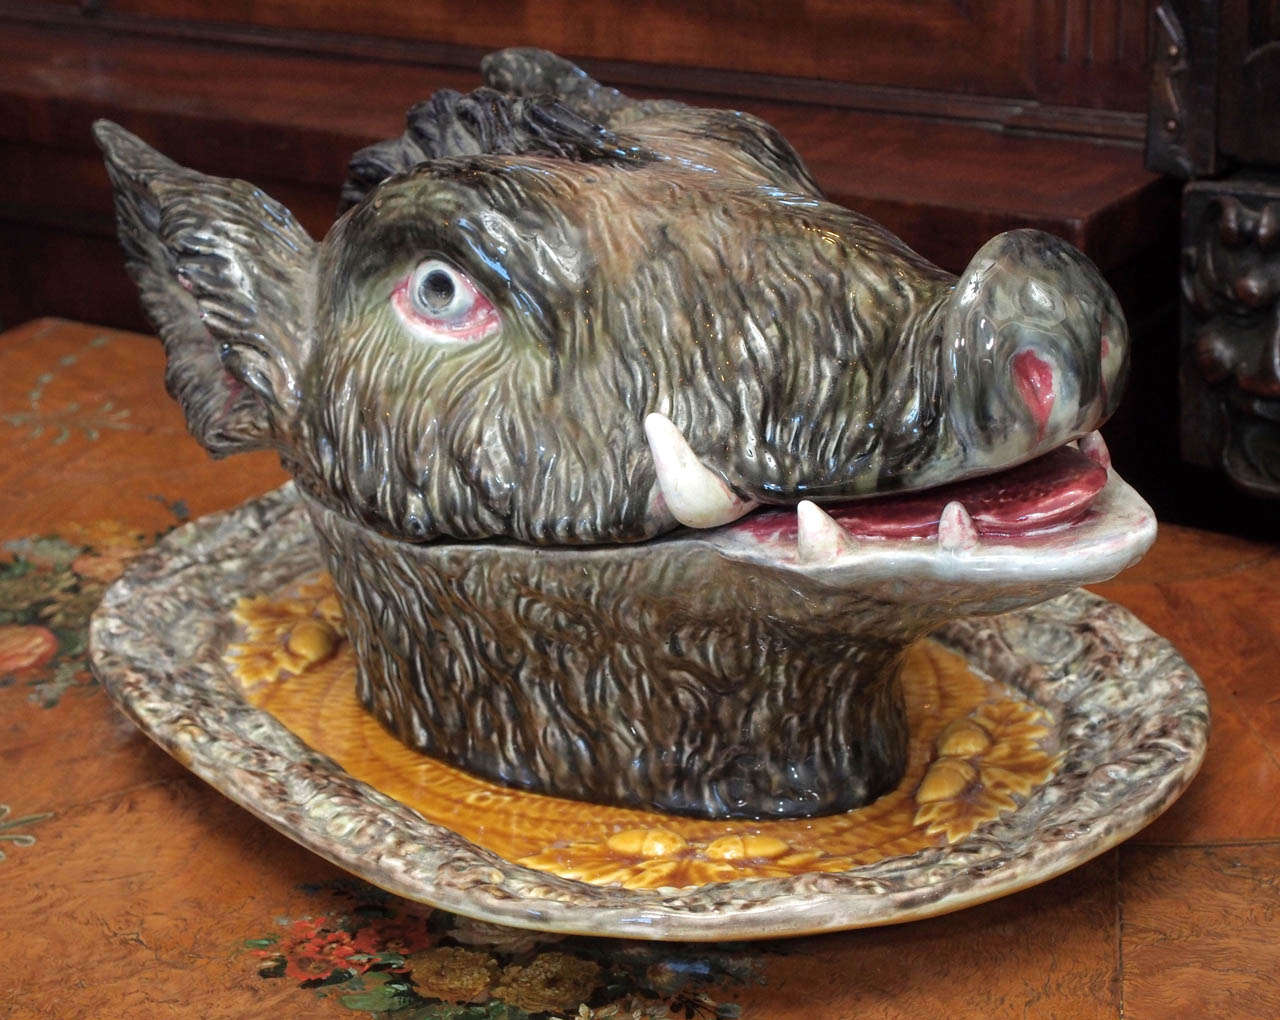 Portuguese Majolica Soup Tureen in the form of a boars head on a platter with bas relief oak leaf and acorn motif. c. 1900